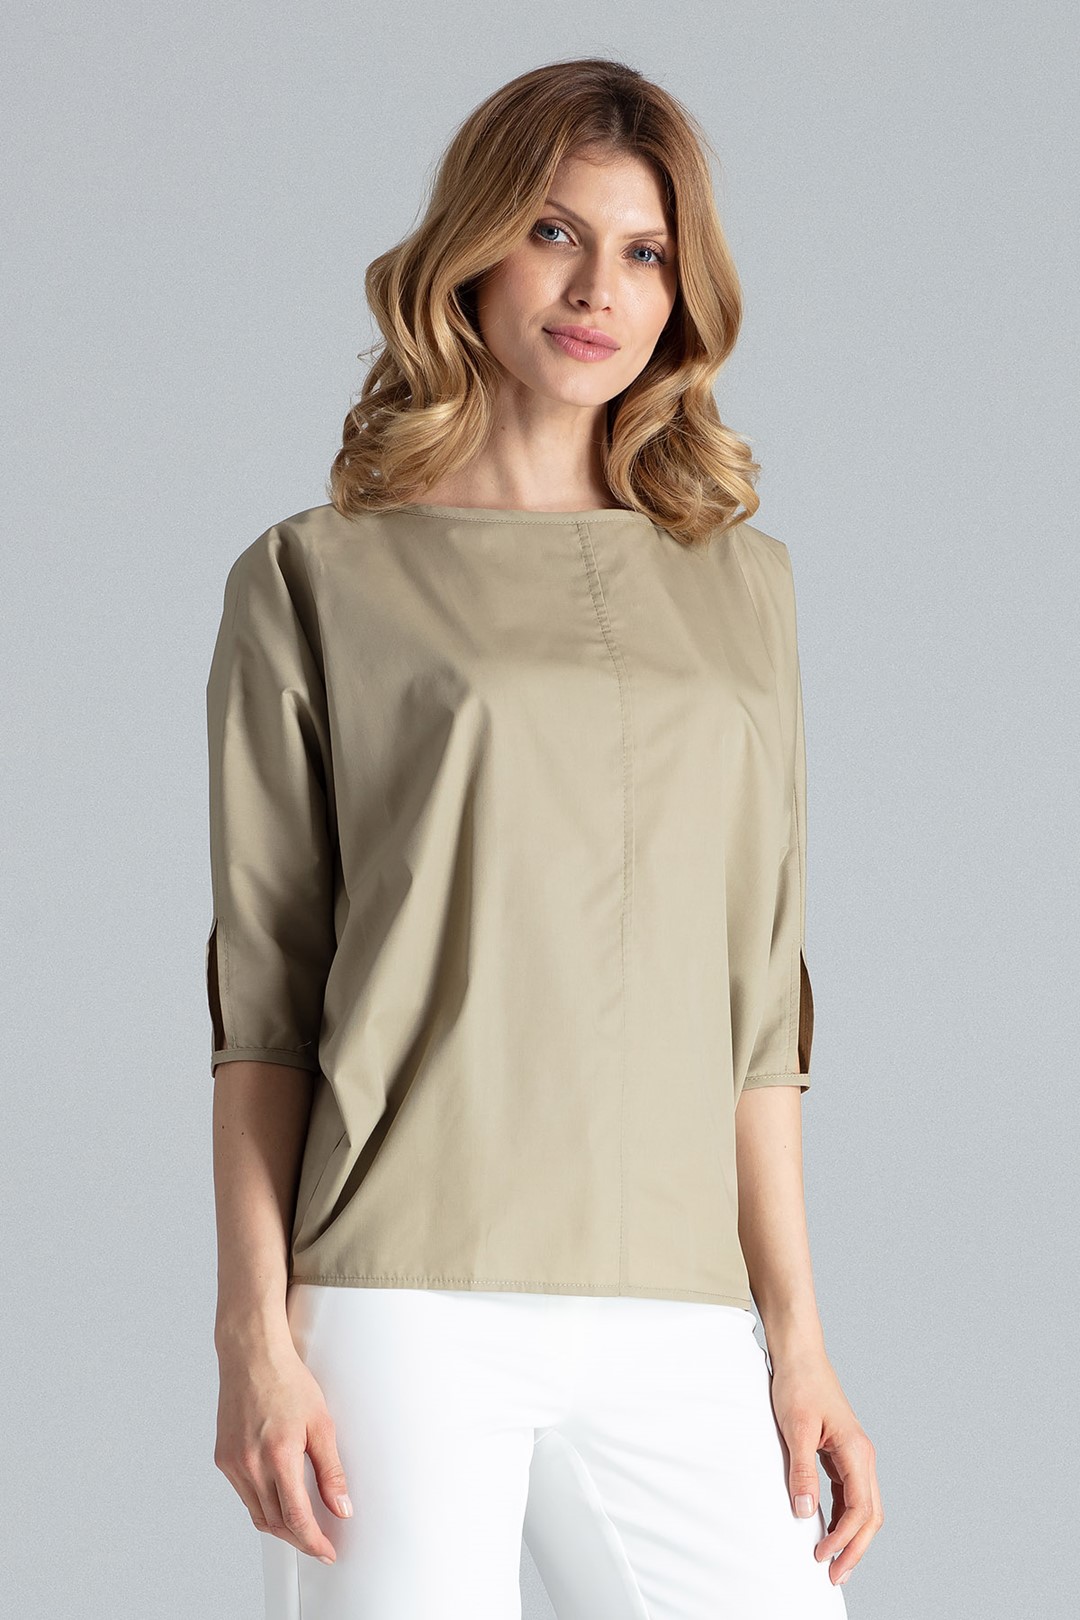 Blouse M563 Olive green S/M